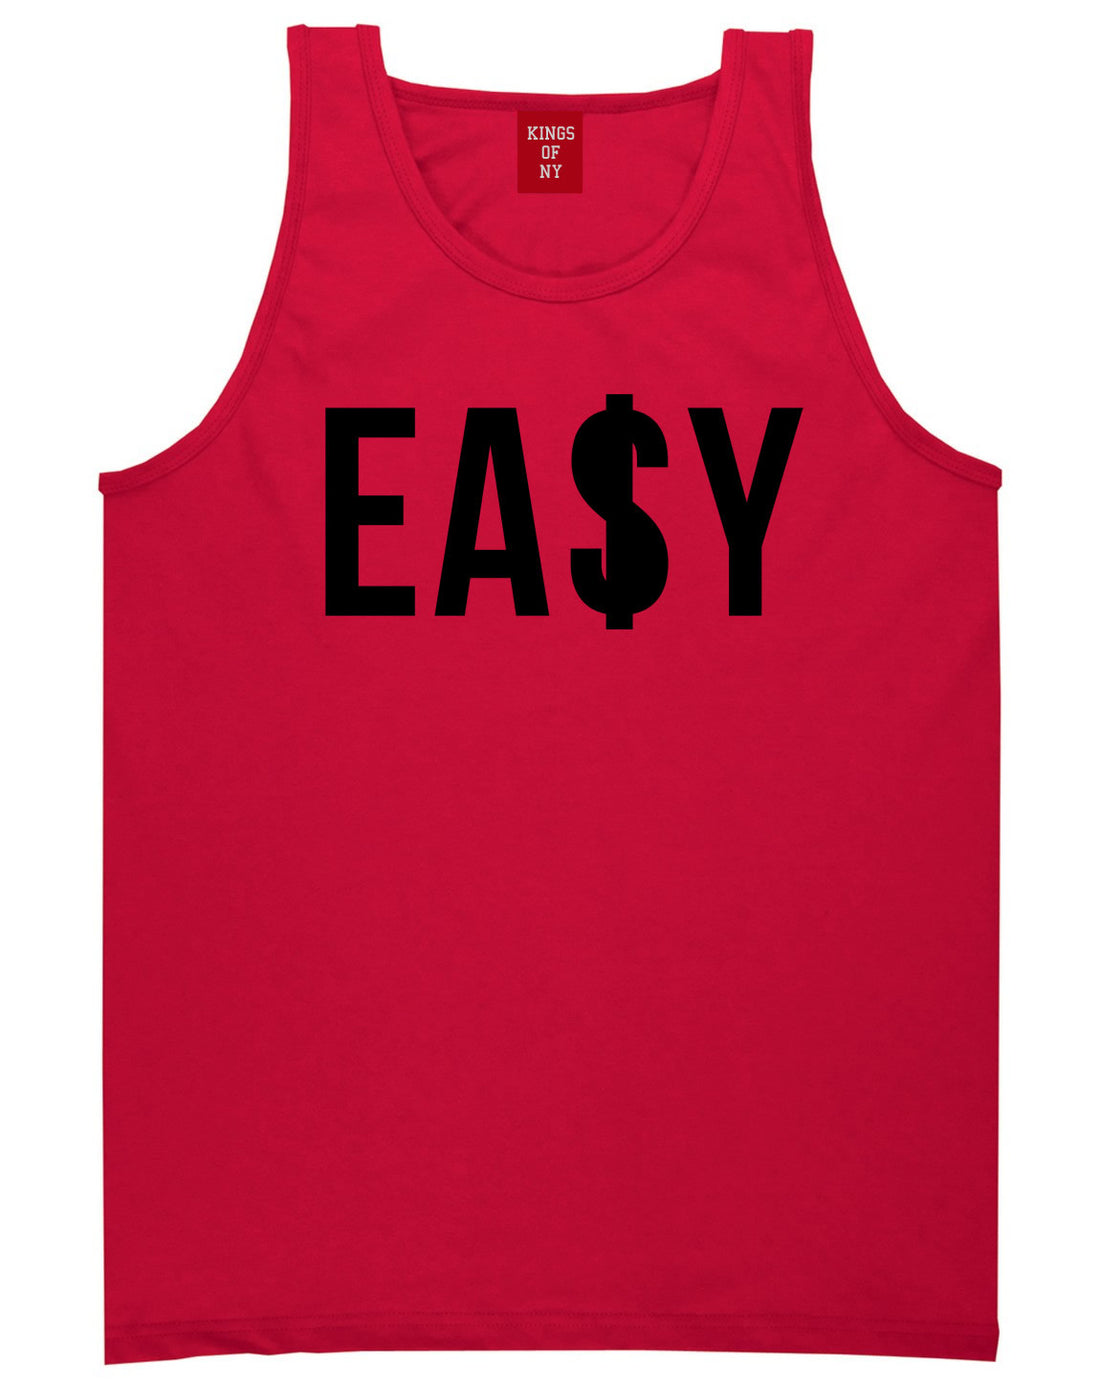 Easy Money Big High Dope Cool Black by Kings Of NY Tank Top In Red by Kings Of NY